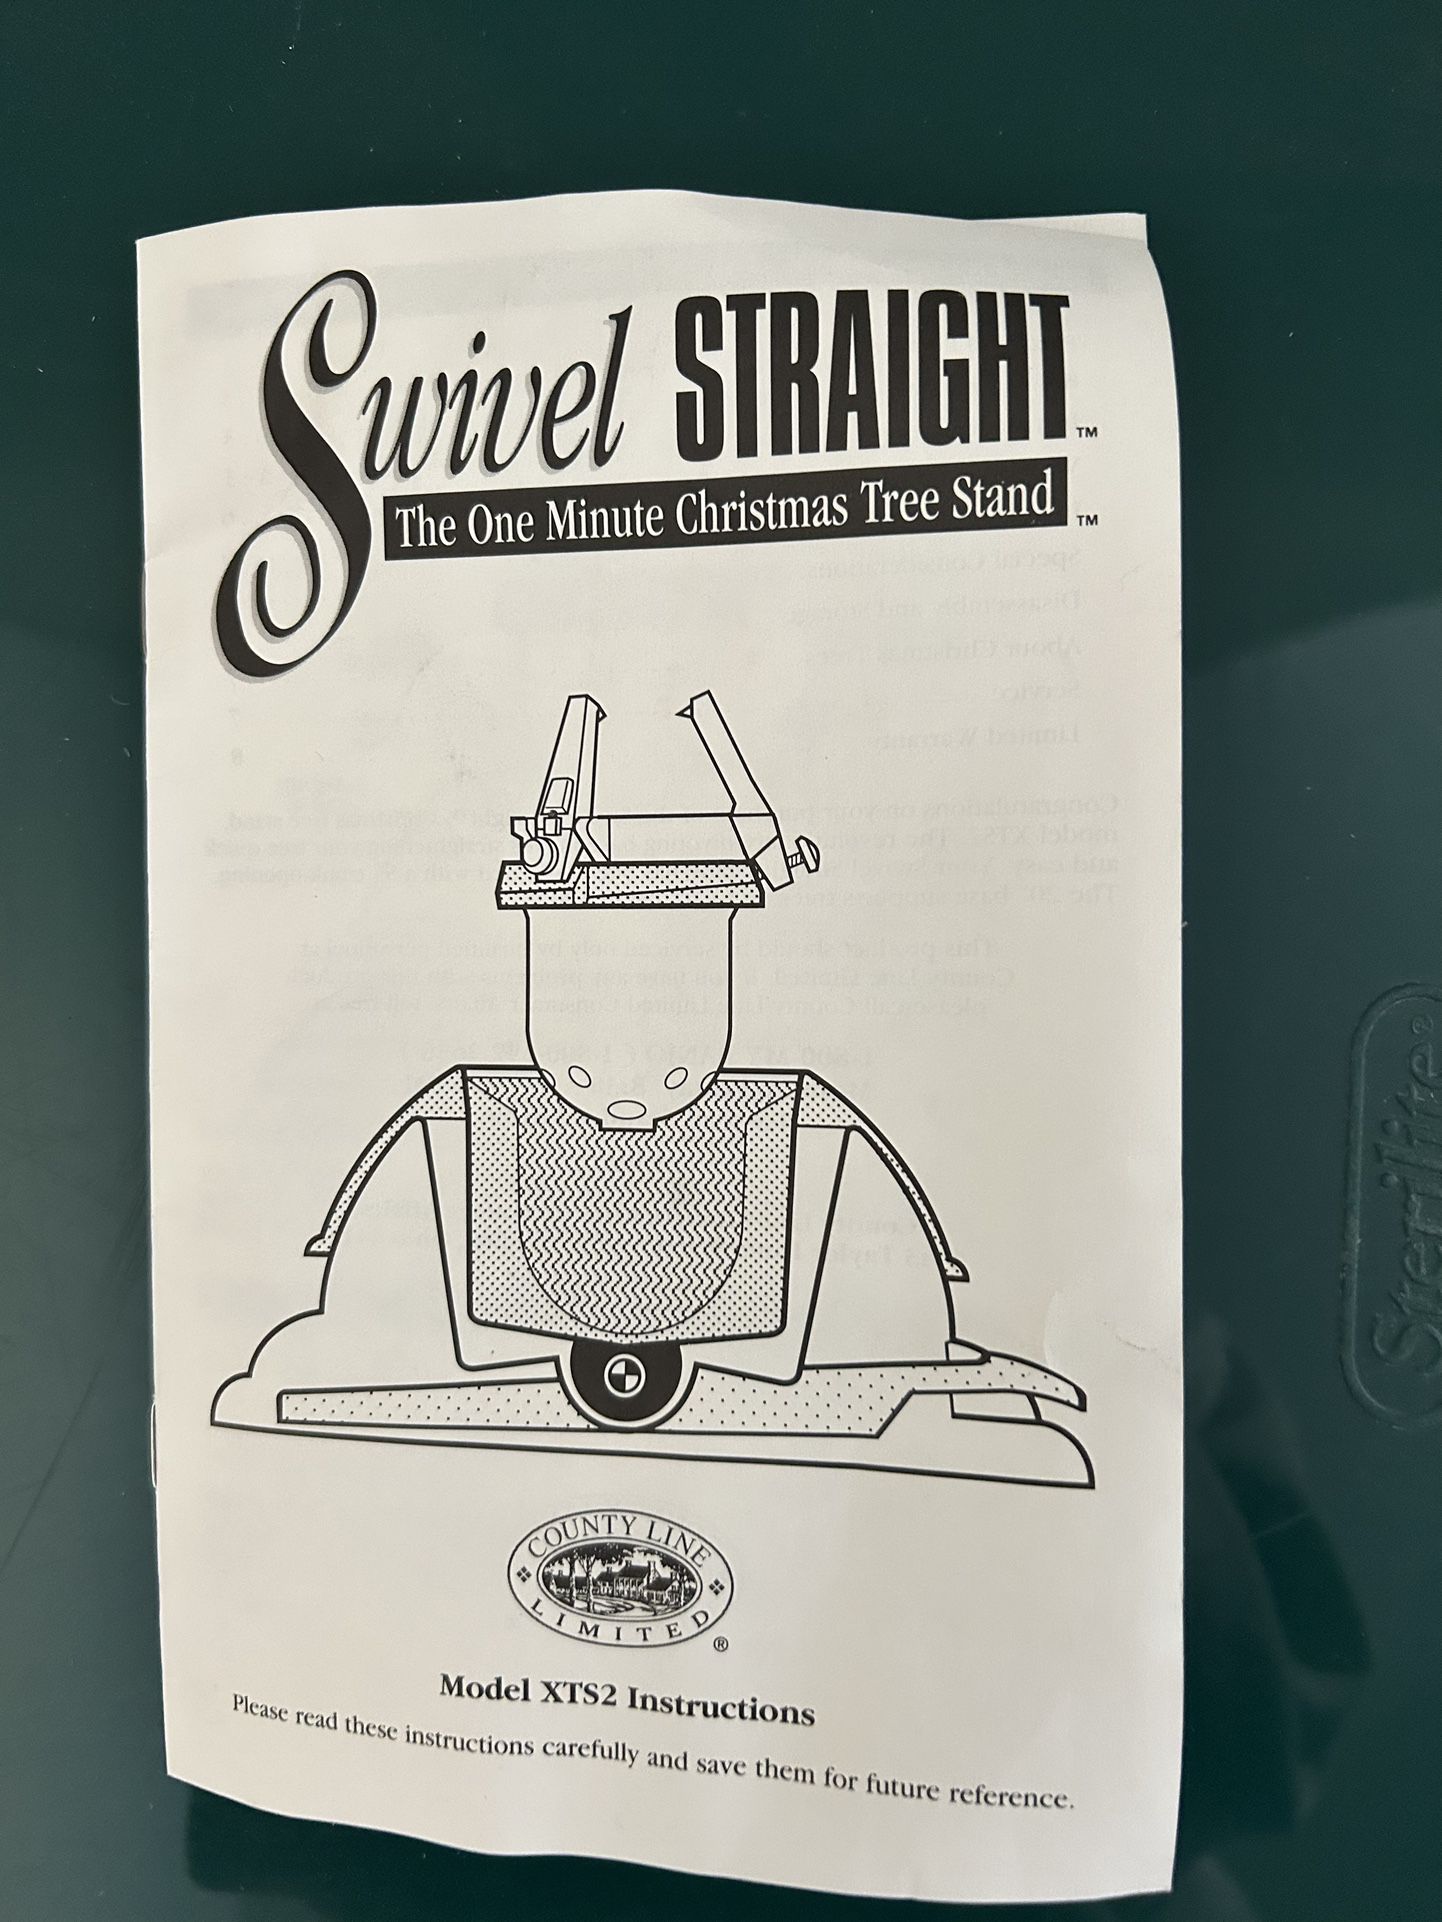 Swivel Straight One Minute Christmas Tree Stand